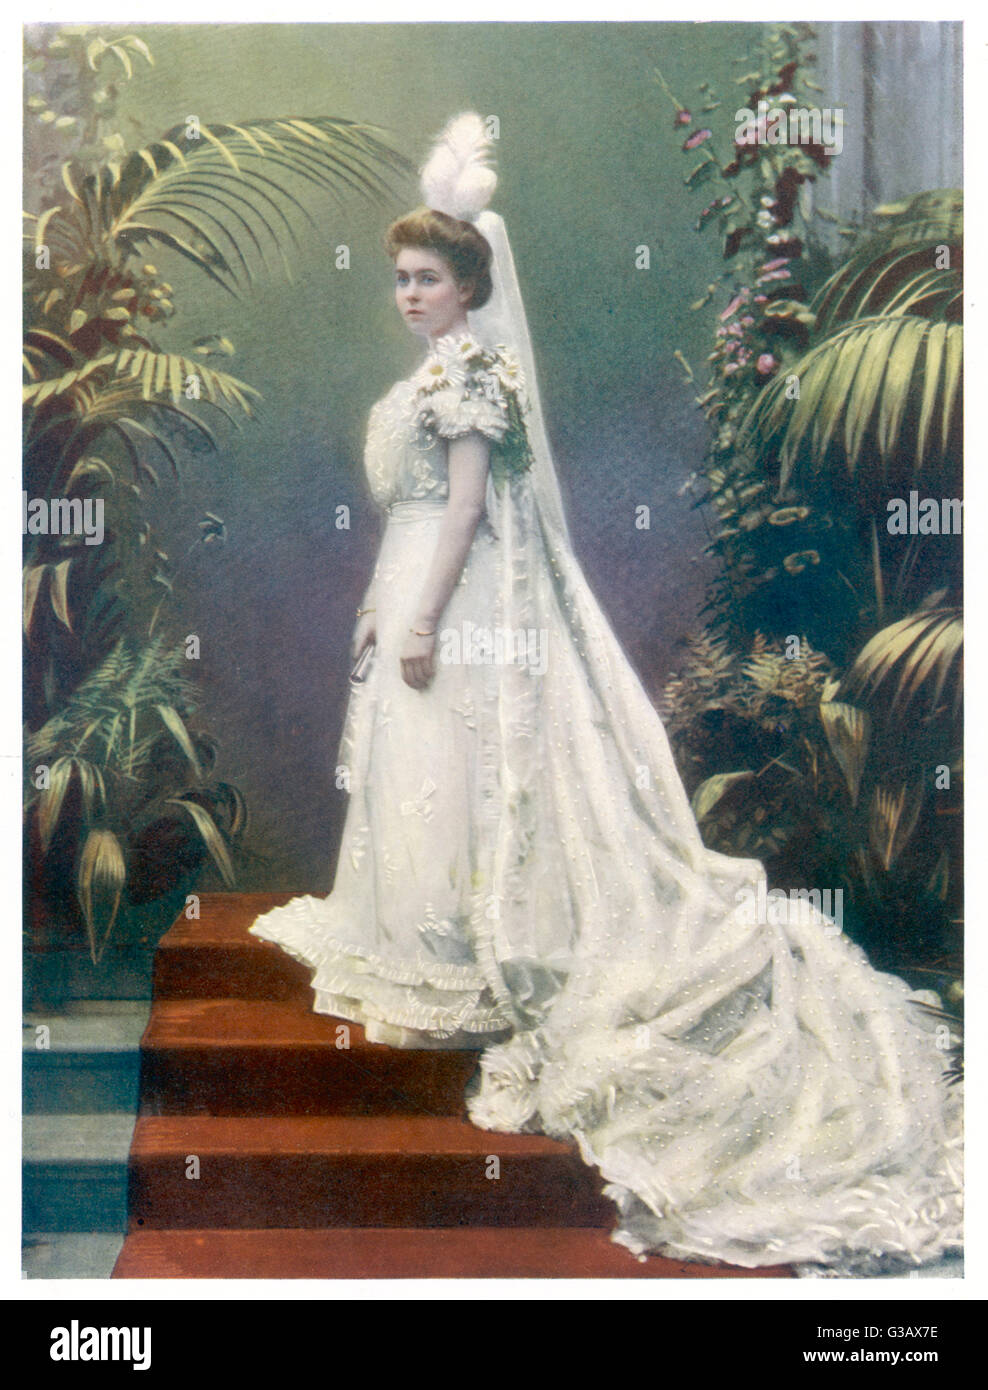 Dress Princess Margaret High Resolution Stock Photography And Images Alamy,How Do I Hang Curtains In A Bay Window